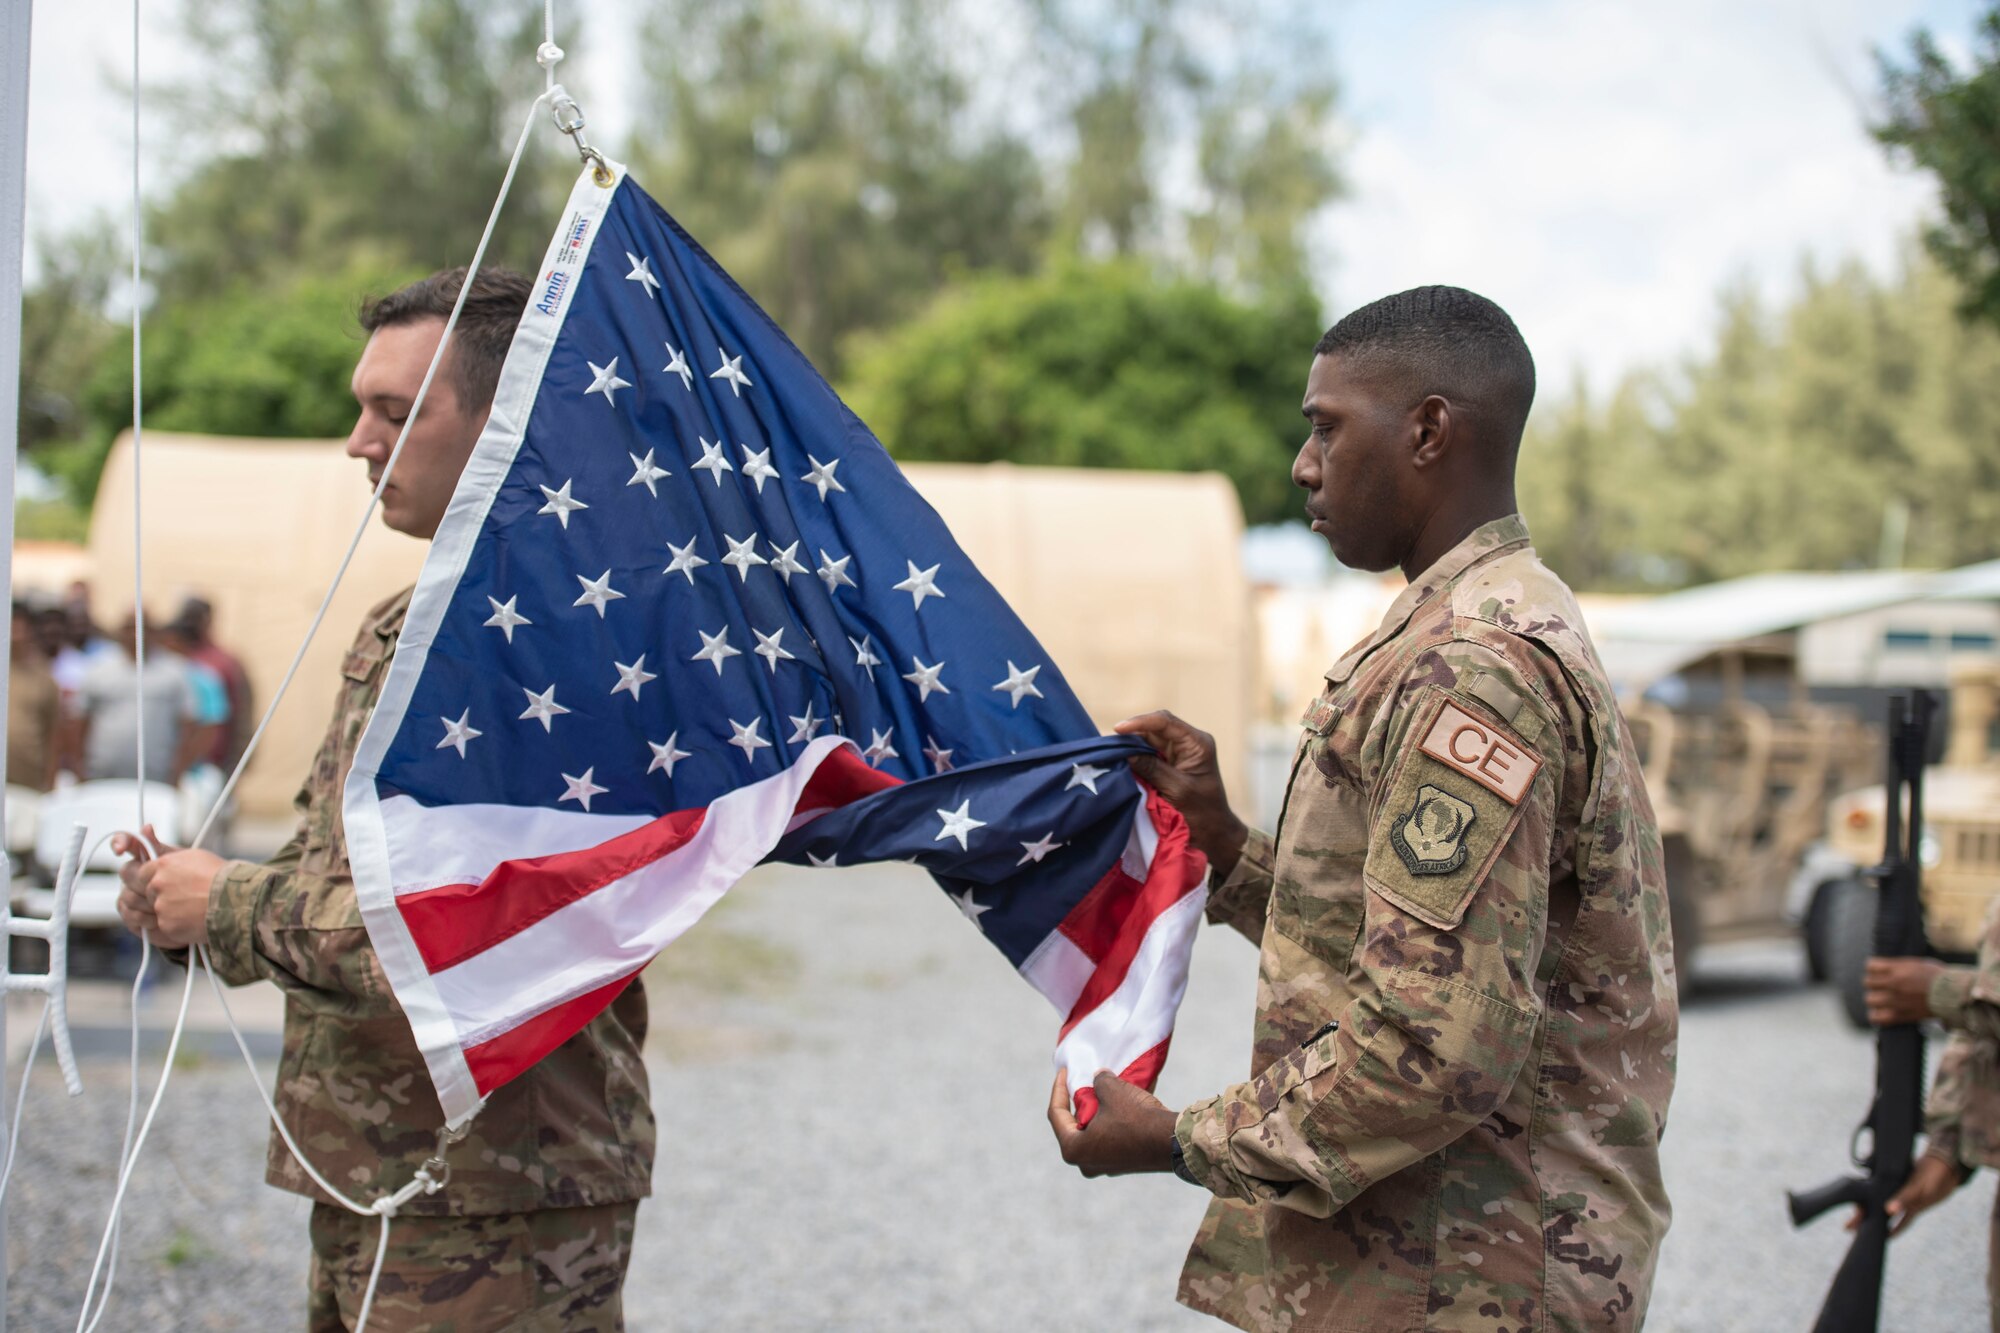 U.S. Air Force Staff Sgt. Sidney Dellinger, 475th Expeditionary Air Base Squadron materiel management journeyman, and Staff Sgt. Corey Smith, 475th EABS heating, ventilation, and air conditioning non-commissioned officer in charge, perform flag detail during a ceremony at Camp Simba, Kenya, Aug. 26, 2019. The 475th EABS raised the flag for the first time since the base operating support-integrator mission started in 2017, signifying the change from tactical to enduring operations. (U.S. Air Force photo by Staff Sgt. Lexie West)